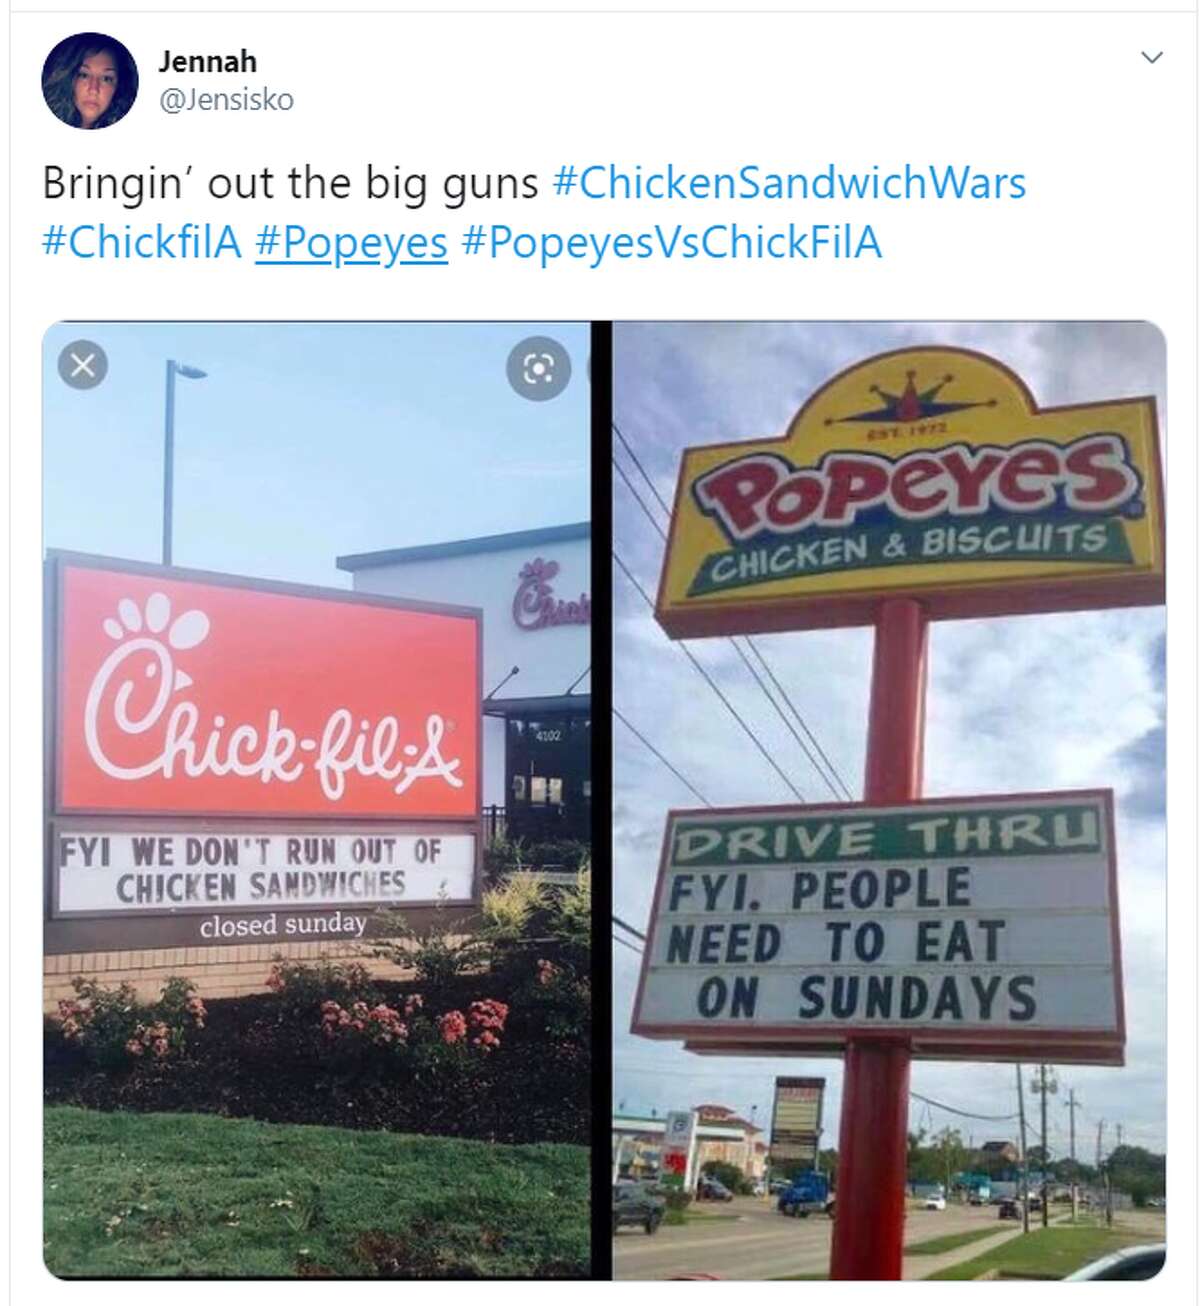 Click ahead to see how some Texans are reacting to the chicken wars. Bringin’ out the big guns #ChickenSandwichWars #ChickfilA #Popeyes #PopeyesVsChickFilA Twitter account: @Jensisko